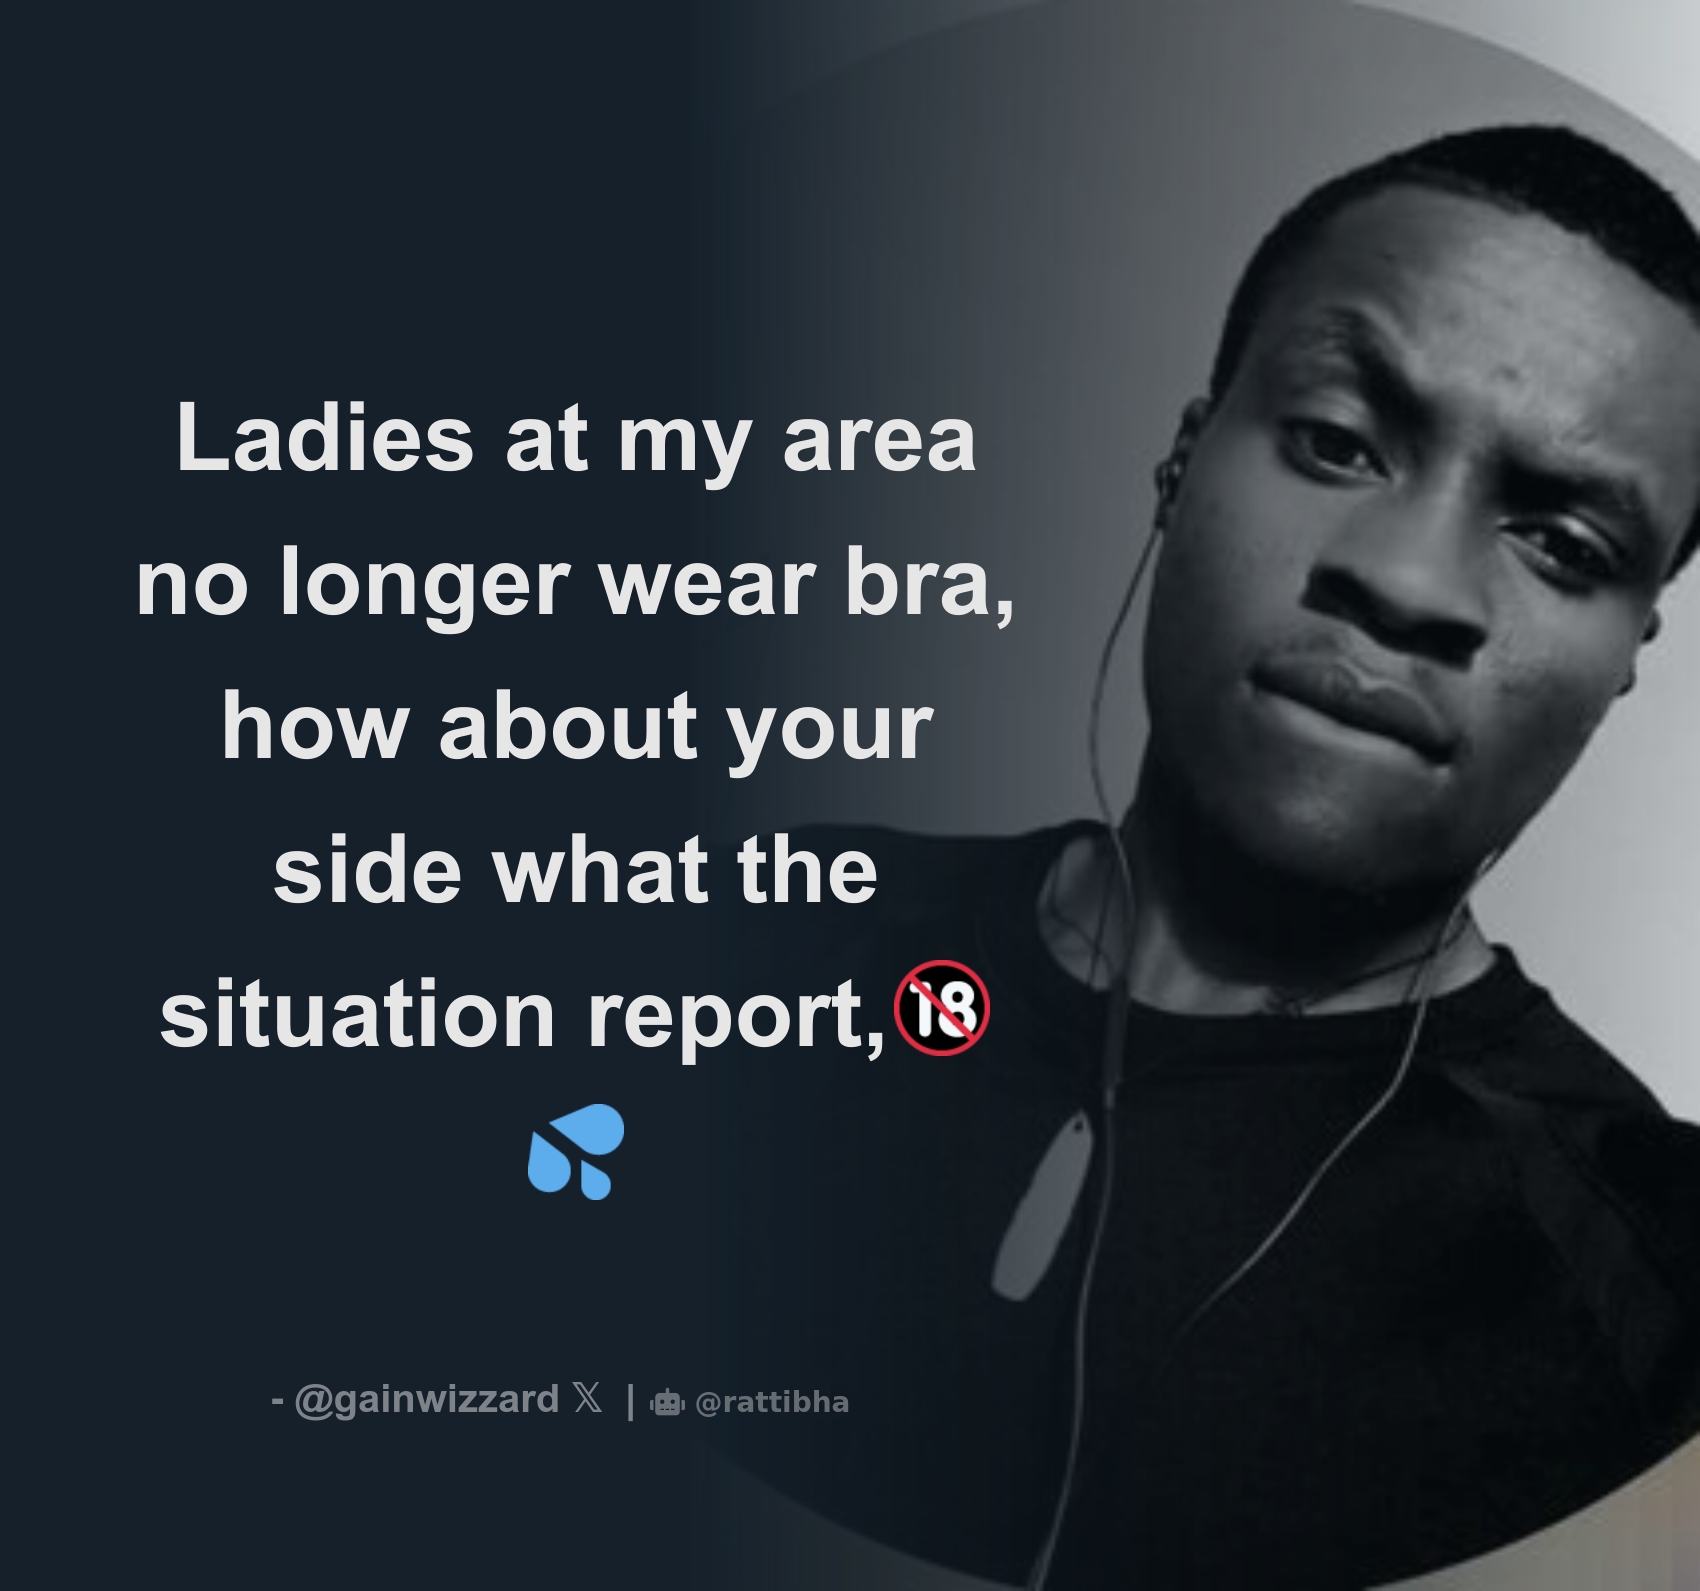 Ladies at my area no longer wear bra, how about your side what the  situation report,🔞💦 - Download Tweet Image from B.O.D @gainwizzard -  Rattibha